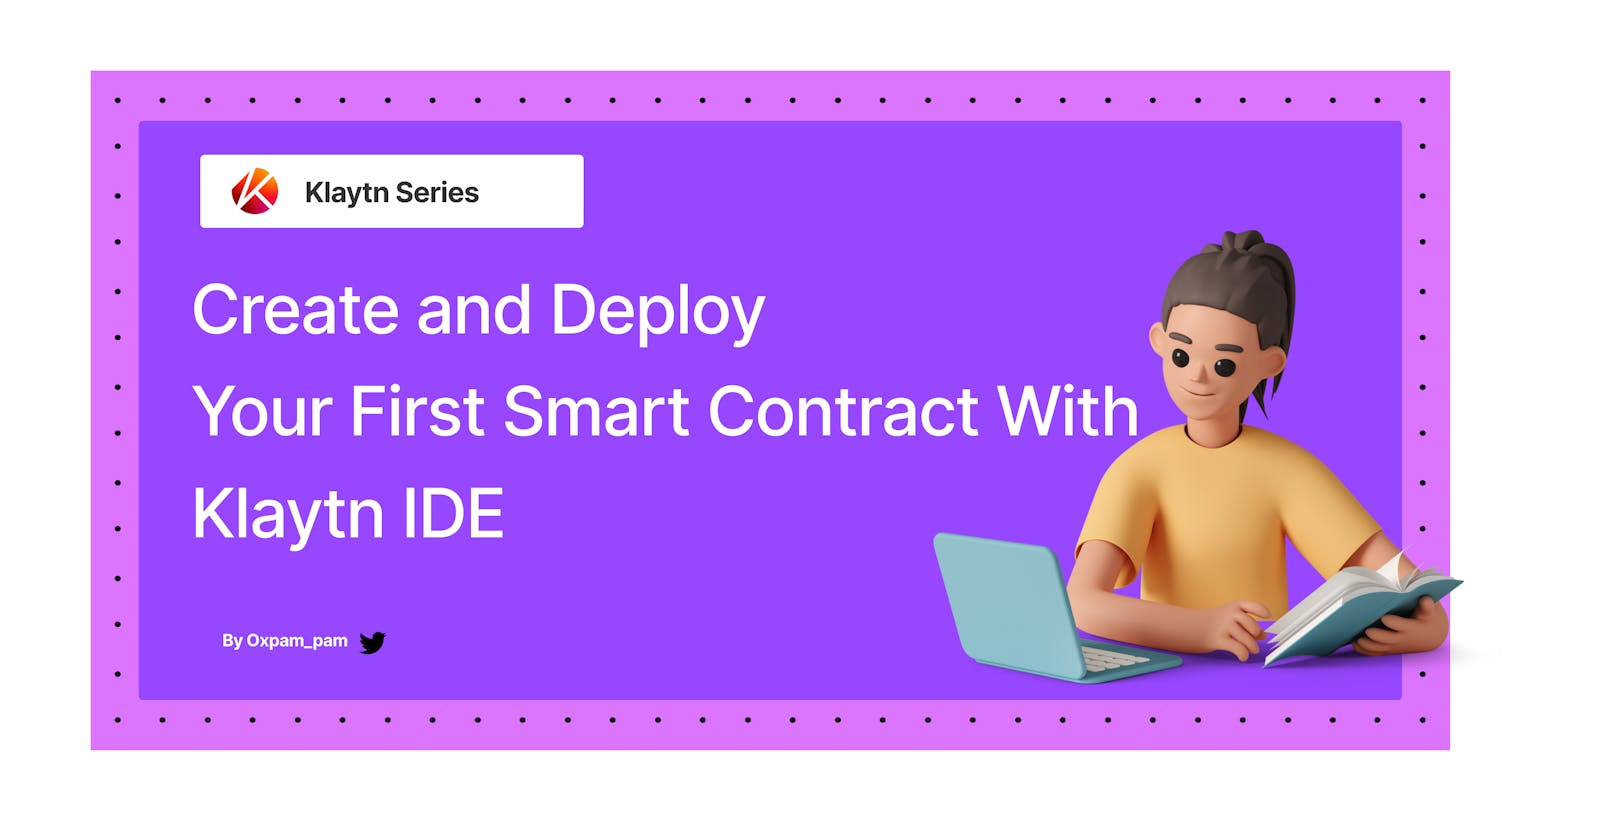 Create and Deploy Your First Smart Contract With Klaytn IDE